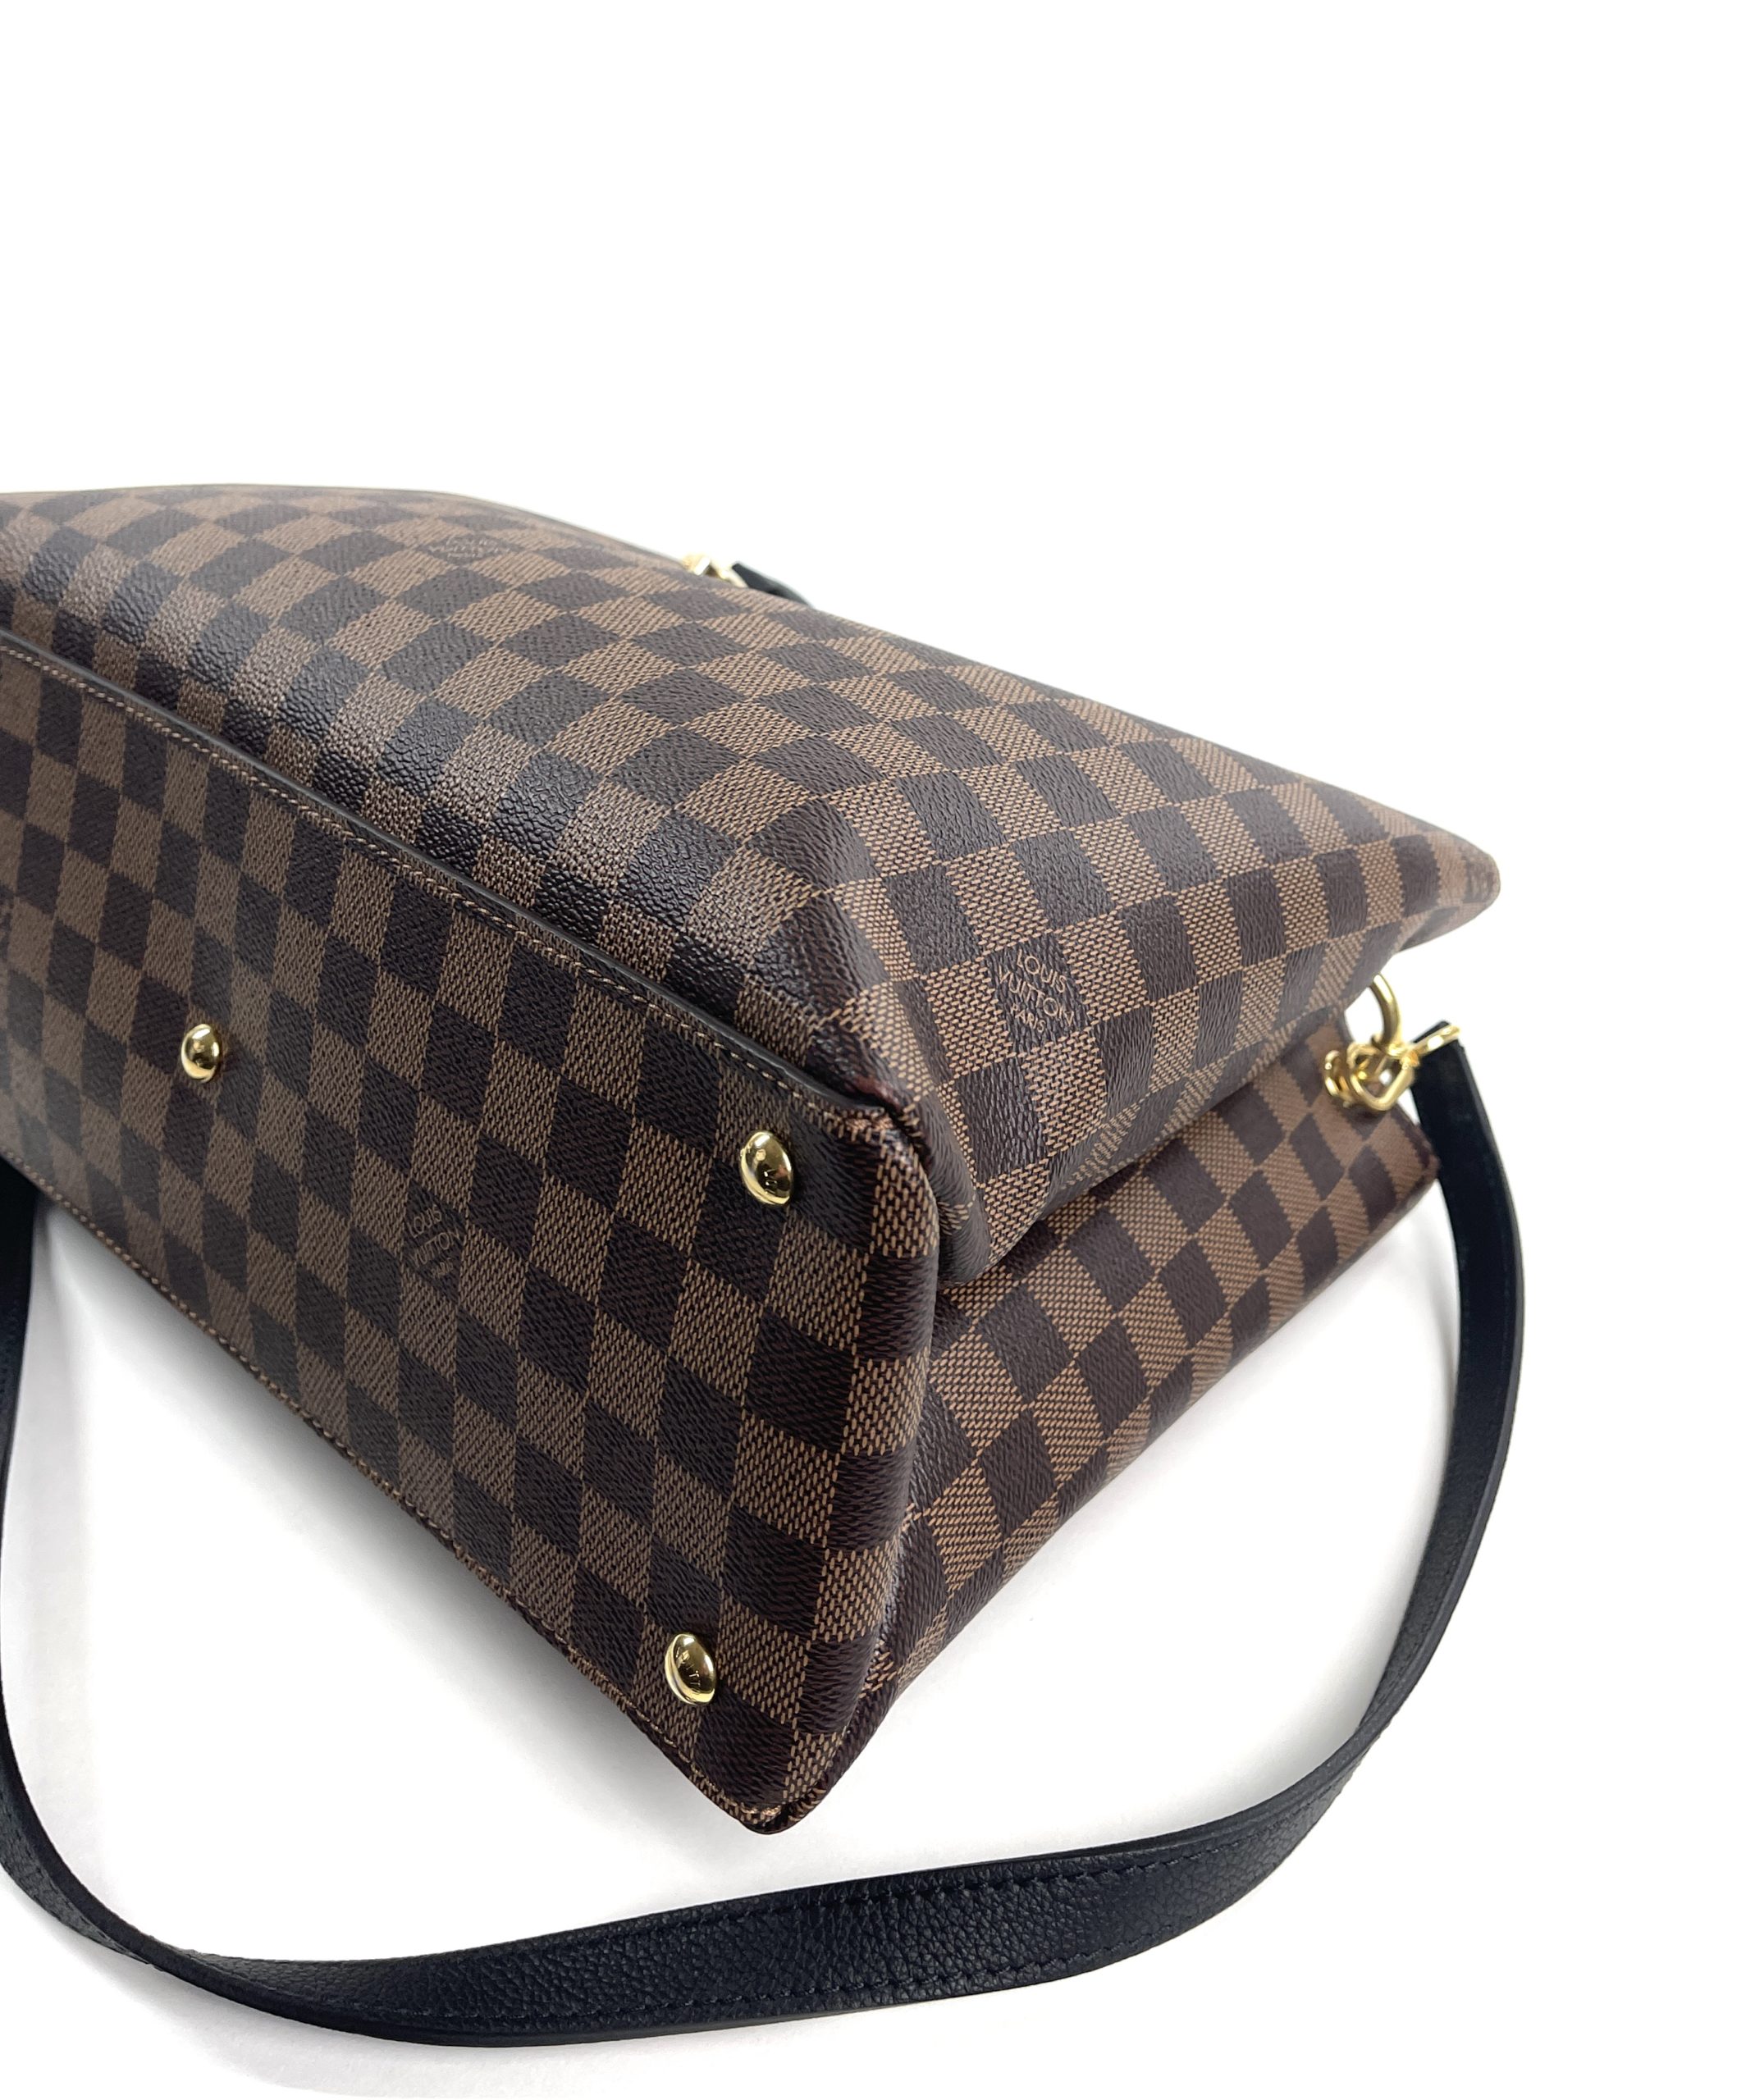 Retired limited edition Louis Vuitton Neverfull MM with Ballerine